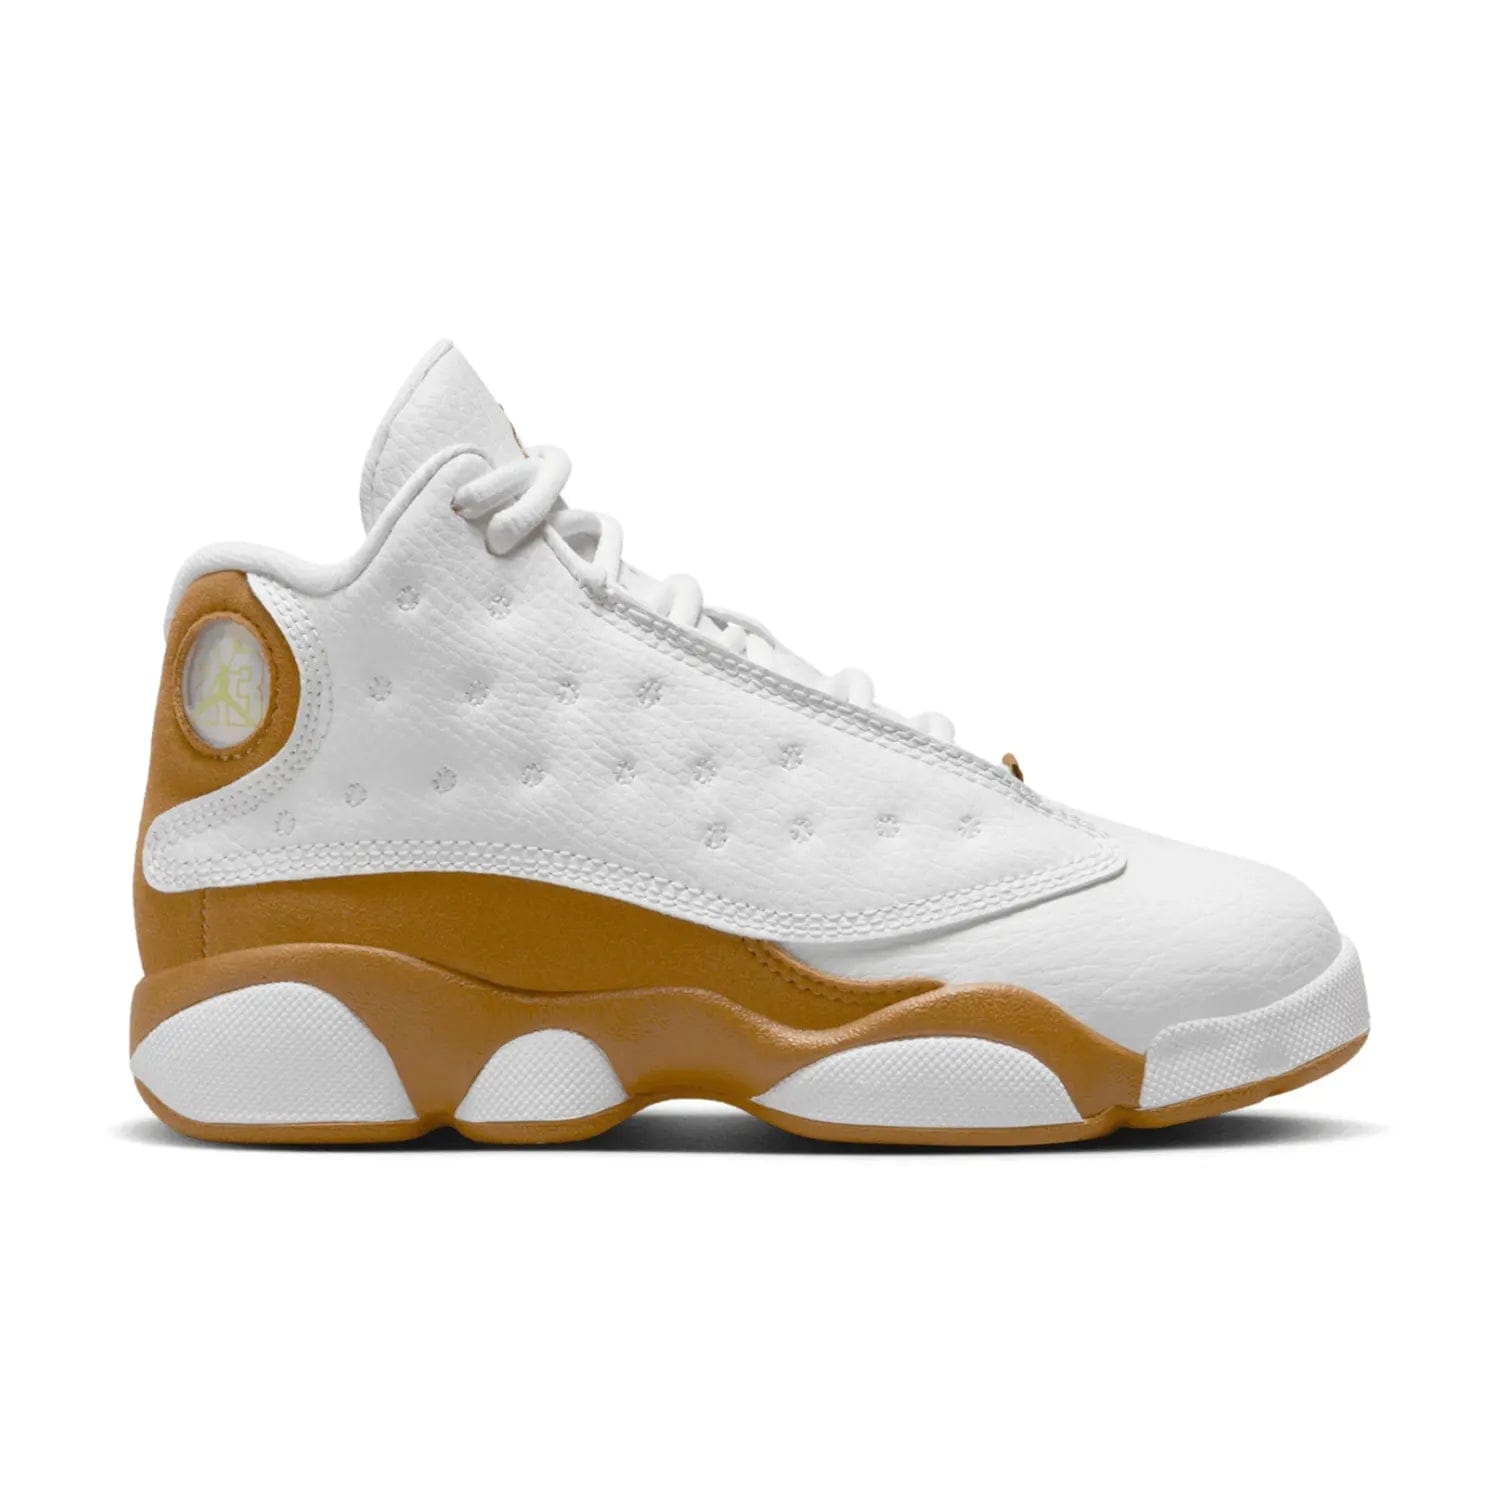 Jordan 13 Retro Wheat (2023) (PS) - Image 1 - Only at www.BallersClubKickz.com - Fresh off the Jordan 13 line, the Retro Wheat features a timeless silhouette with Wheat accents. Make a statement in streetwear and sports in the iconic design and cushioning technology. Get the Jordans 13 Retro Wheat now and elevate your style!